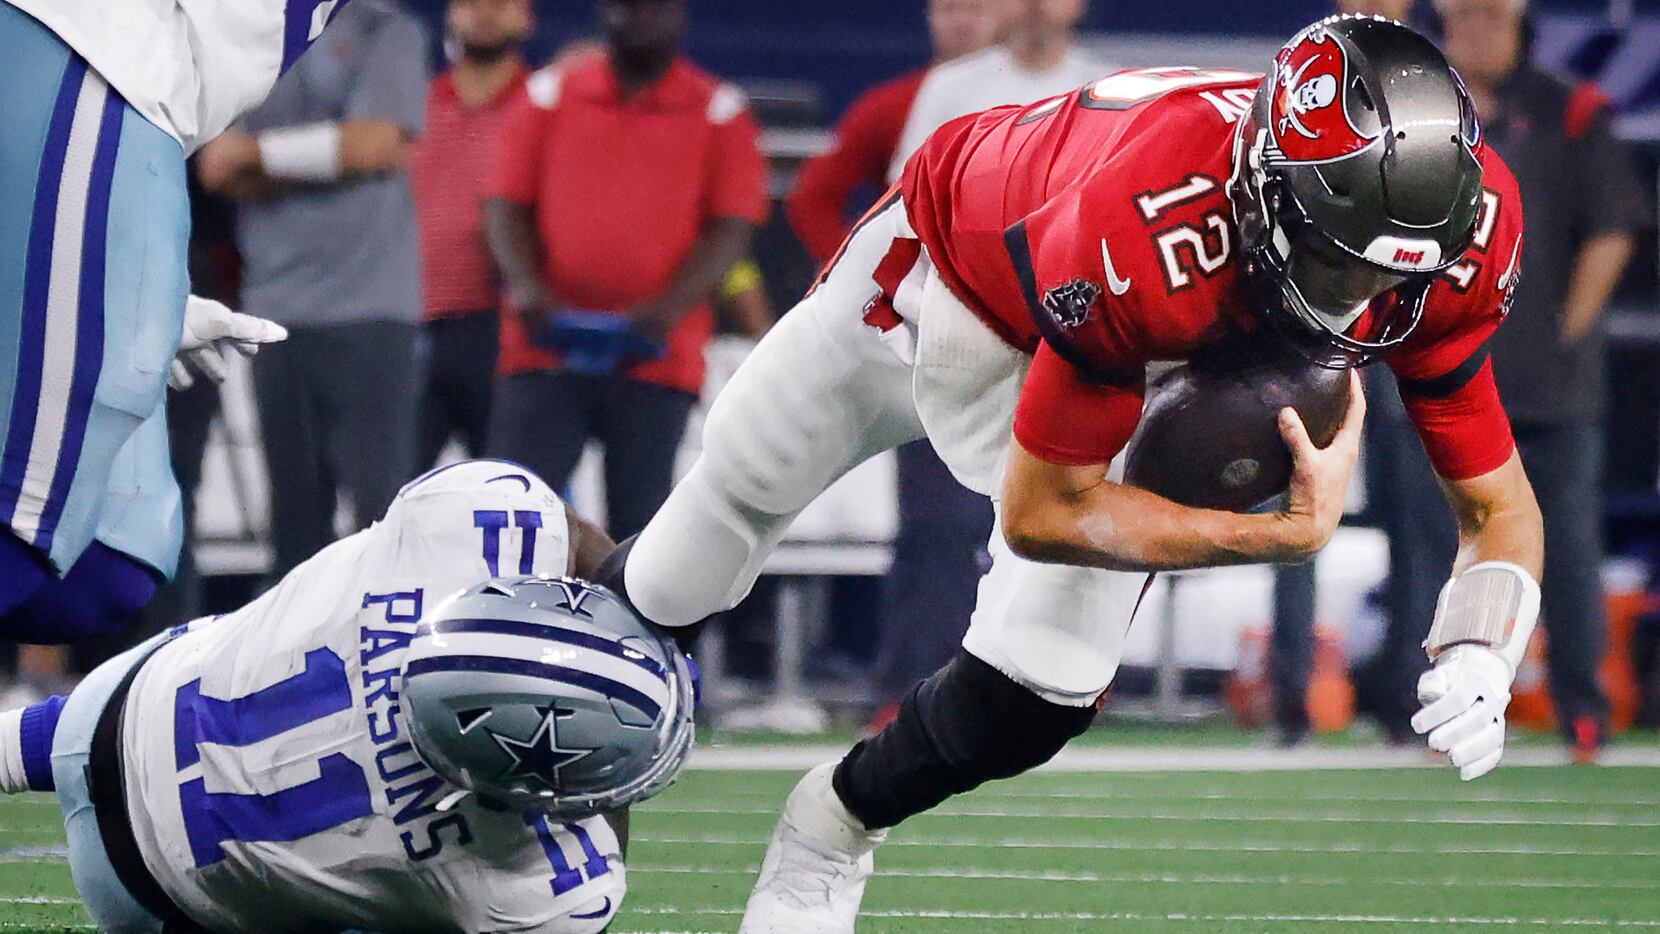 Dallas Cowboys playoff scenarios: Who would they play after Bucs